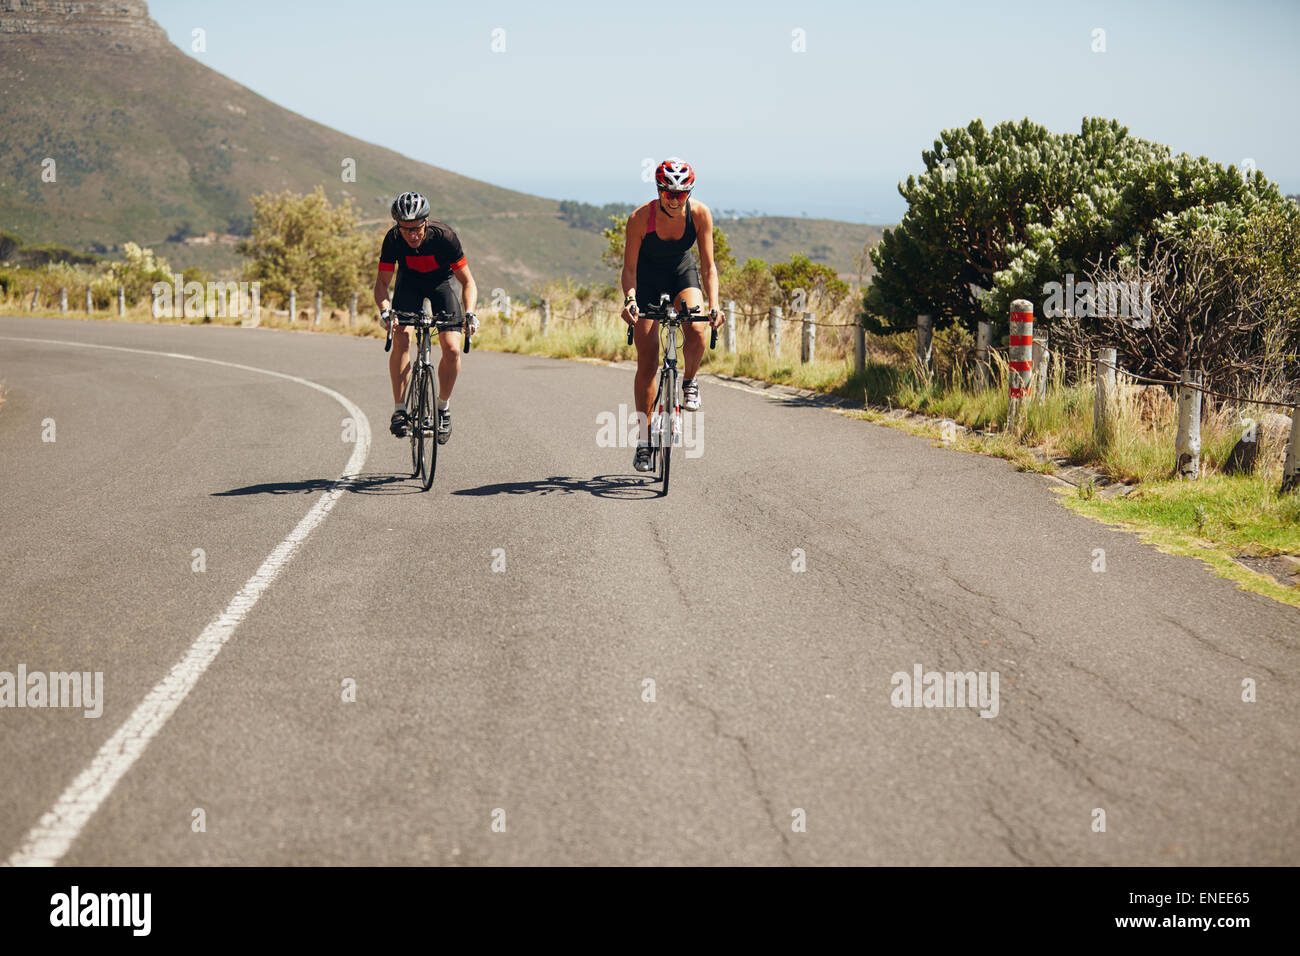 Cyclist riding bikes on open road. Triathletes cycling on bicycles. Practicing for triathlon race. Stock Photo